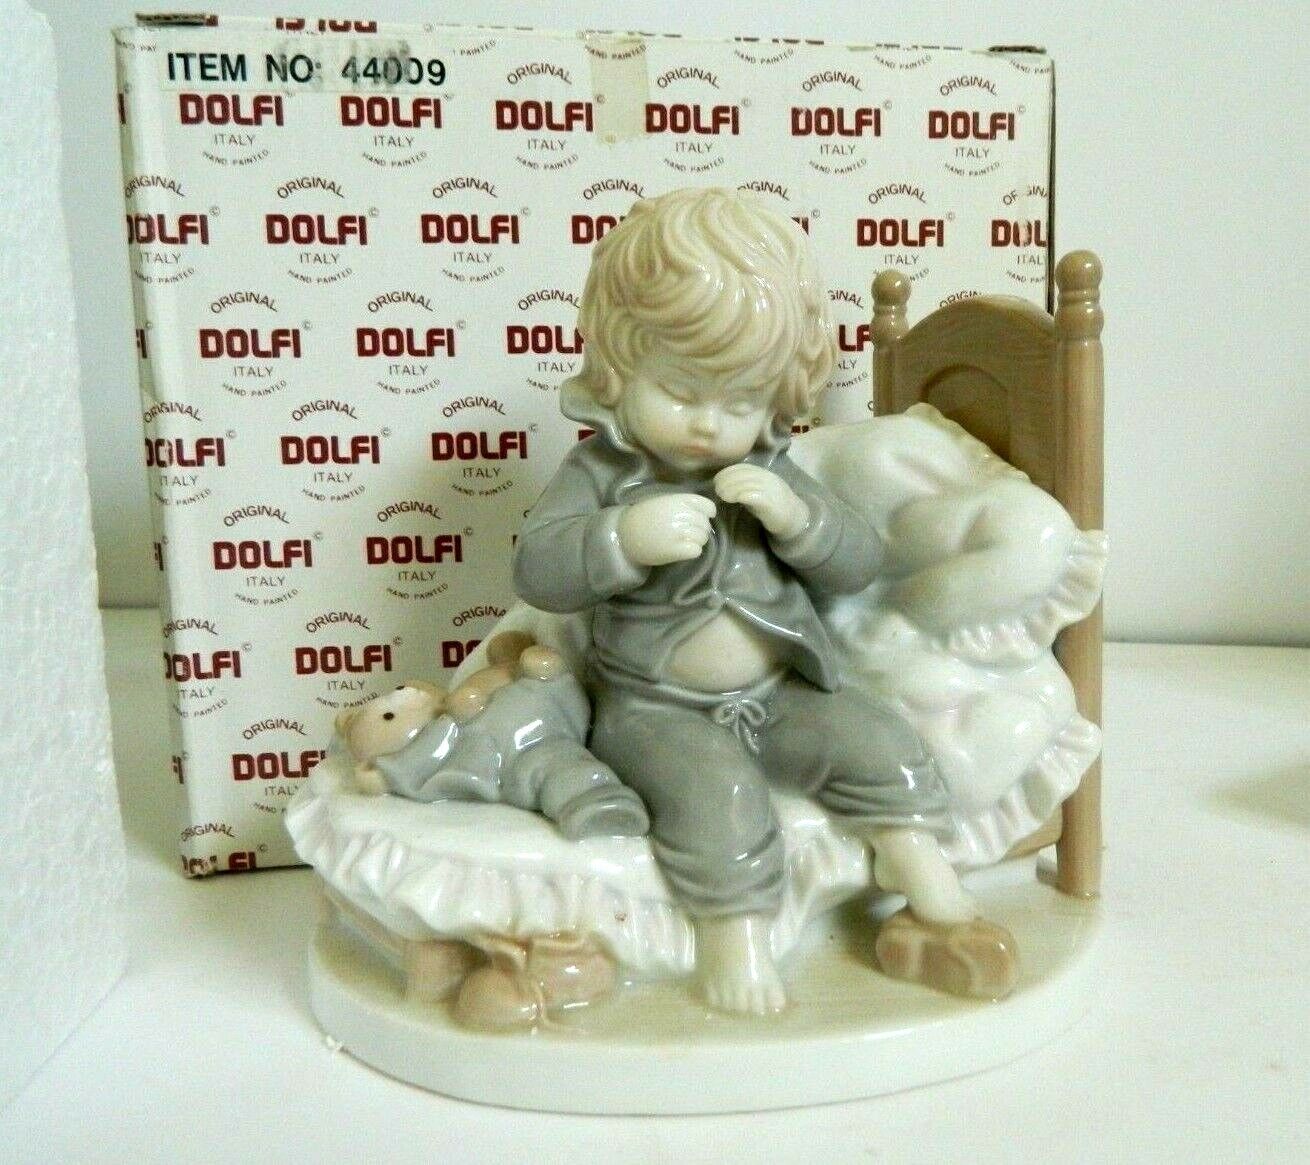 ORIGINAL LISI MARTIN BY DOLFI HAND PAINTED ITALY FIGURINE NEW IN BOX  